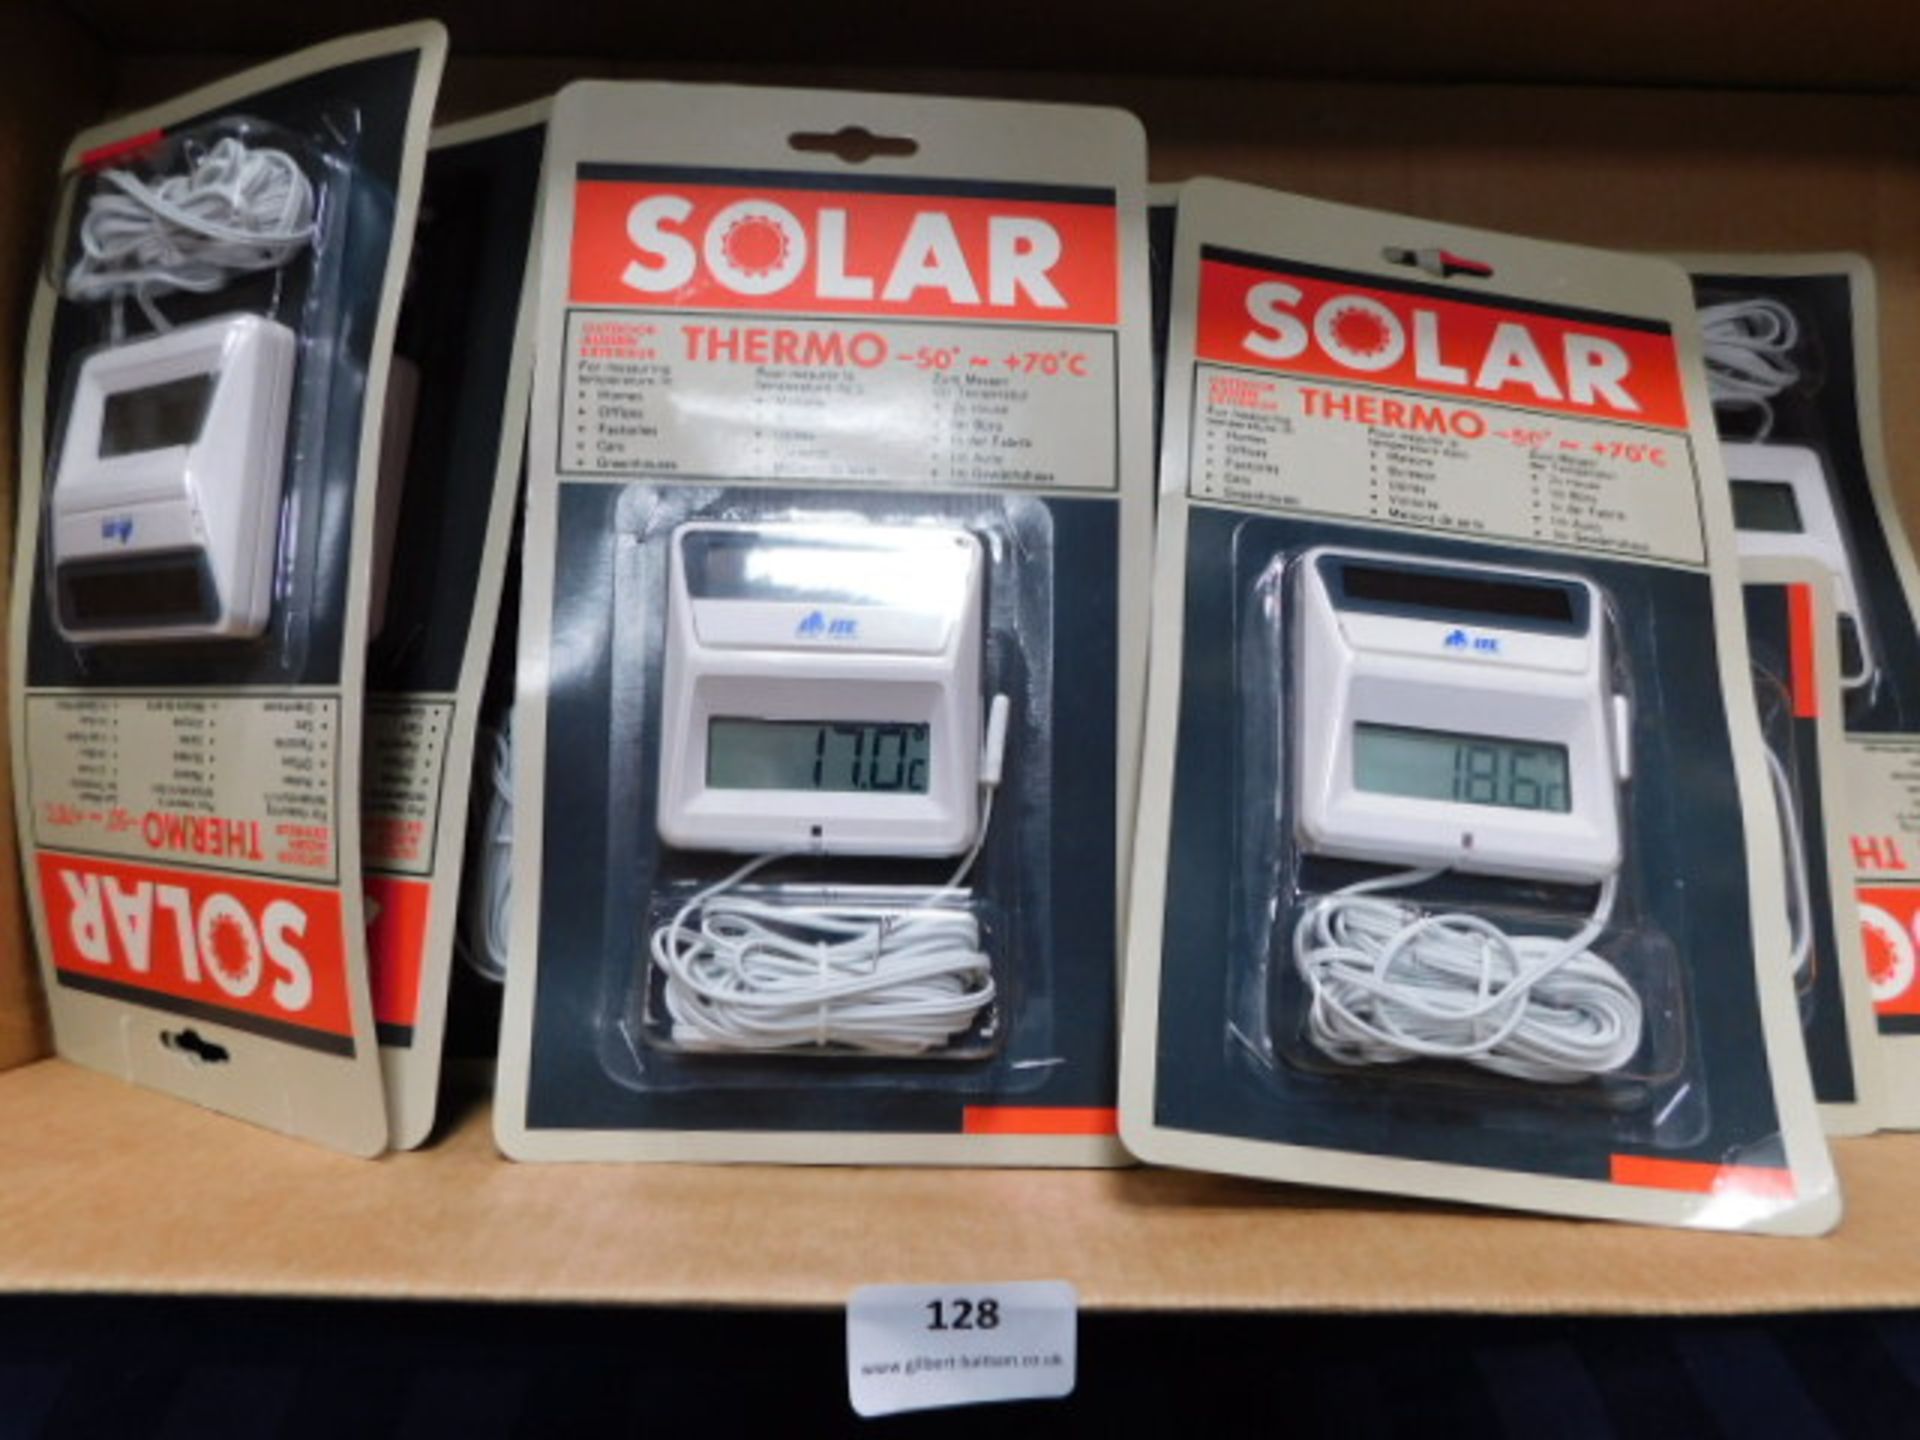 * 15x SP-120 ITE Solar power thermometer